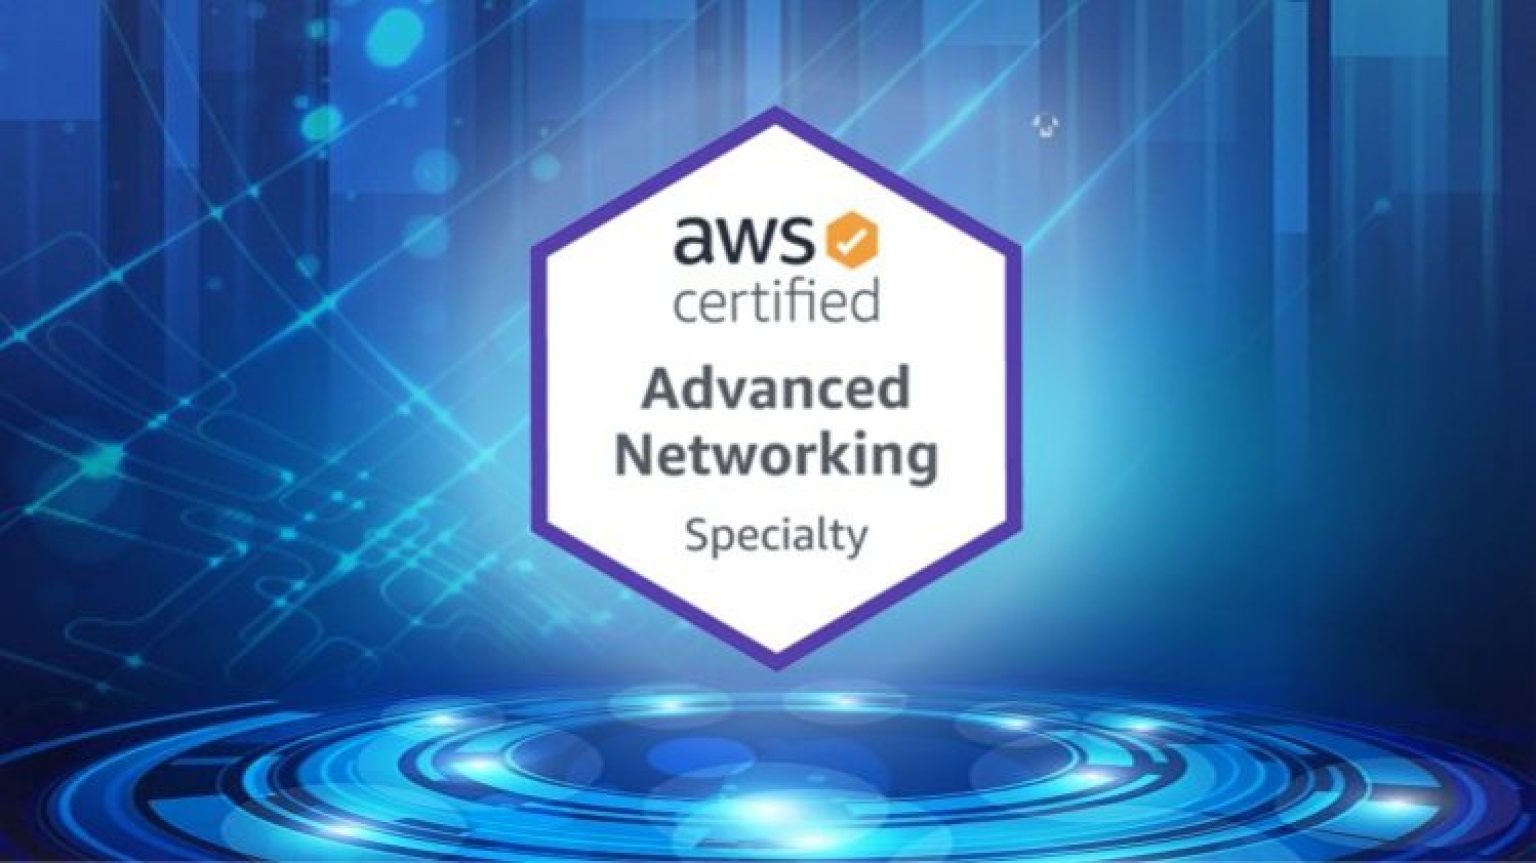 Advance network. AWS Certification cloud Practitioner. HACKERRANK Advanced Certification Crypto Market.